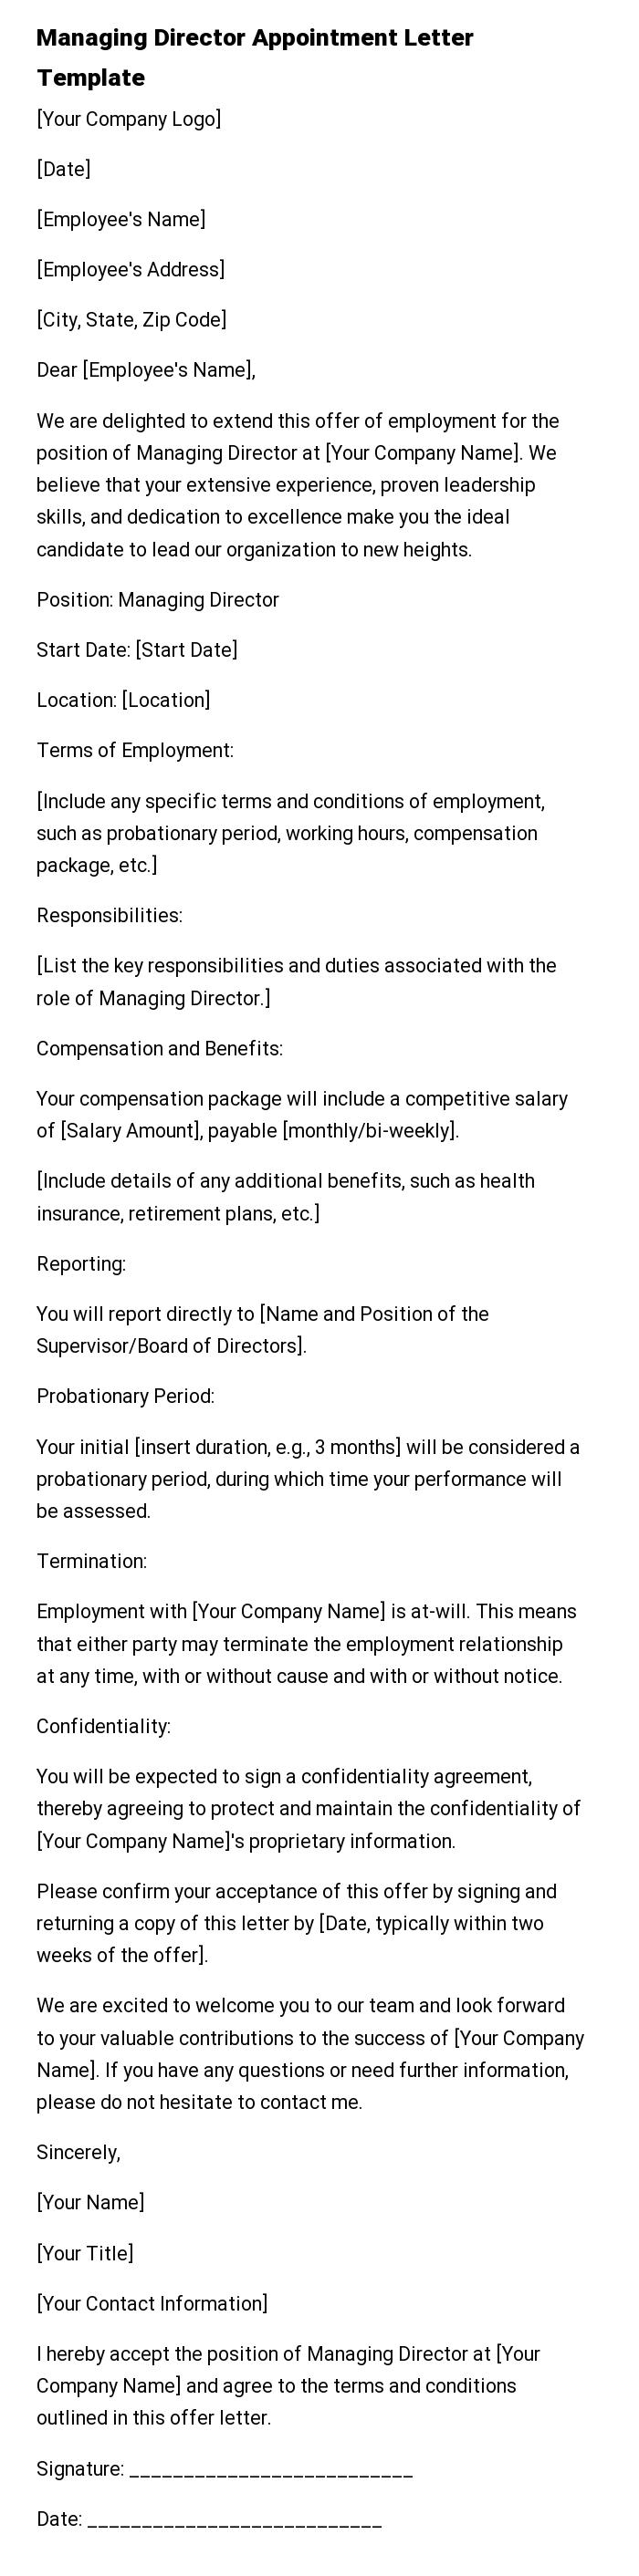 Managing Director Appointment Letter Template